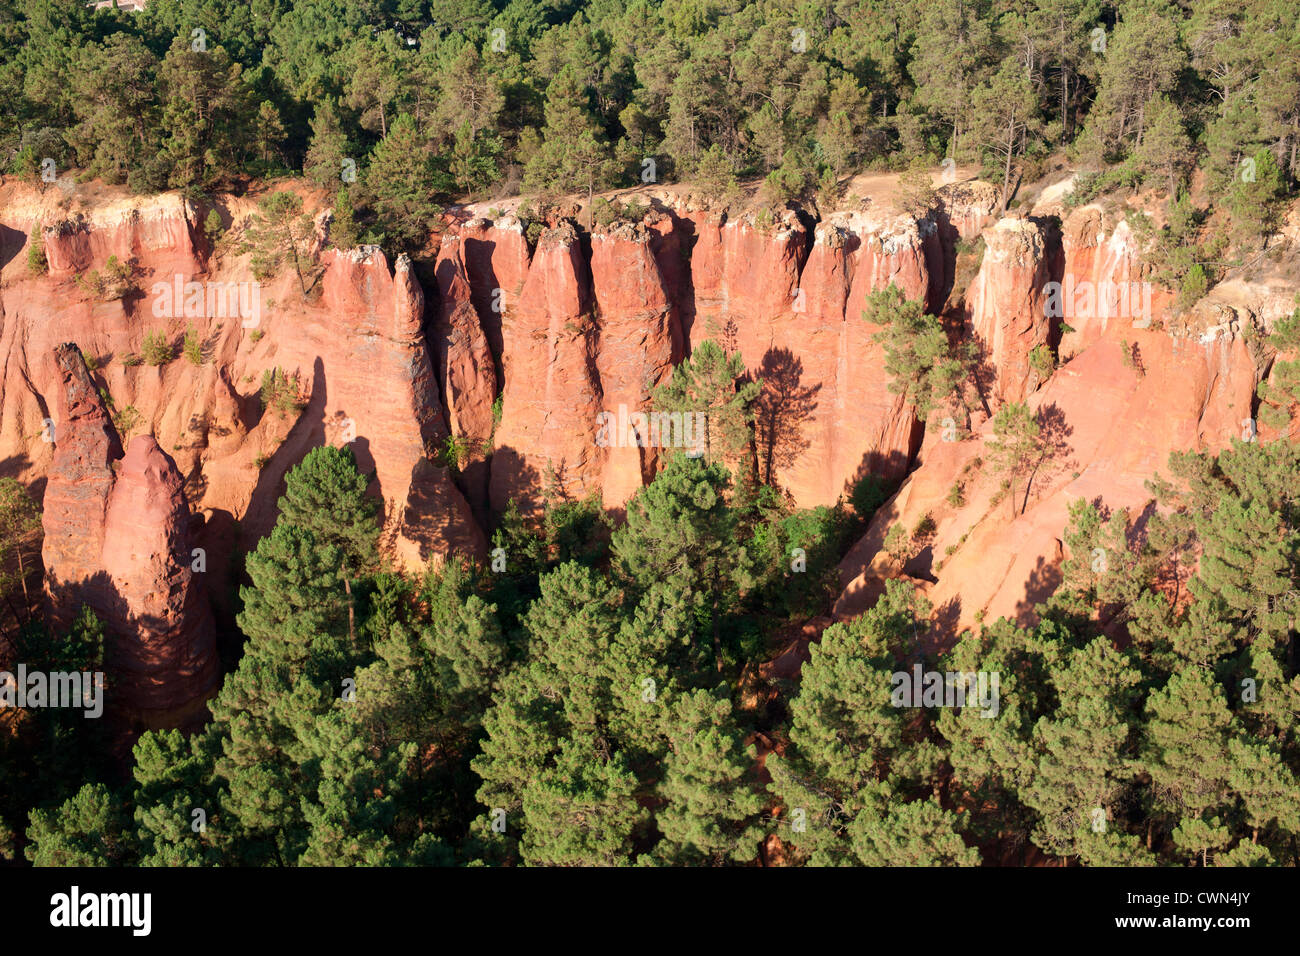 AERIAL VIEW. Red ochre clay cliffs. Roussillon, Lubéron, Vaucluse, Provence, France. Stock Photo